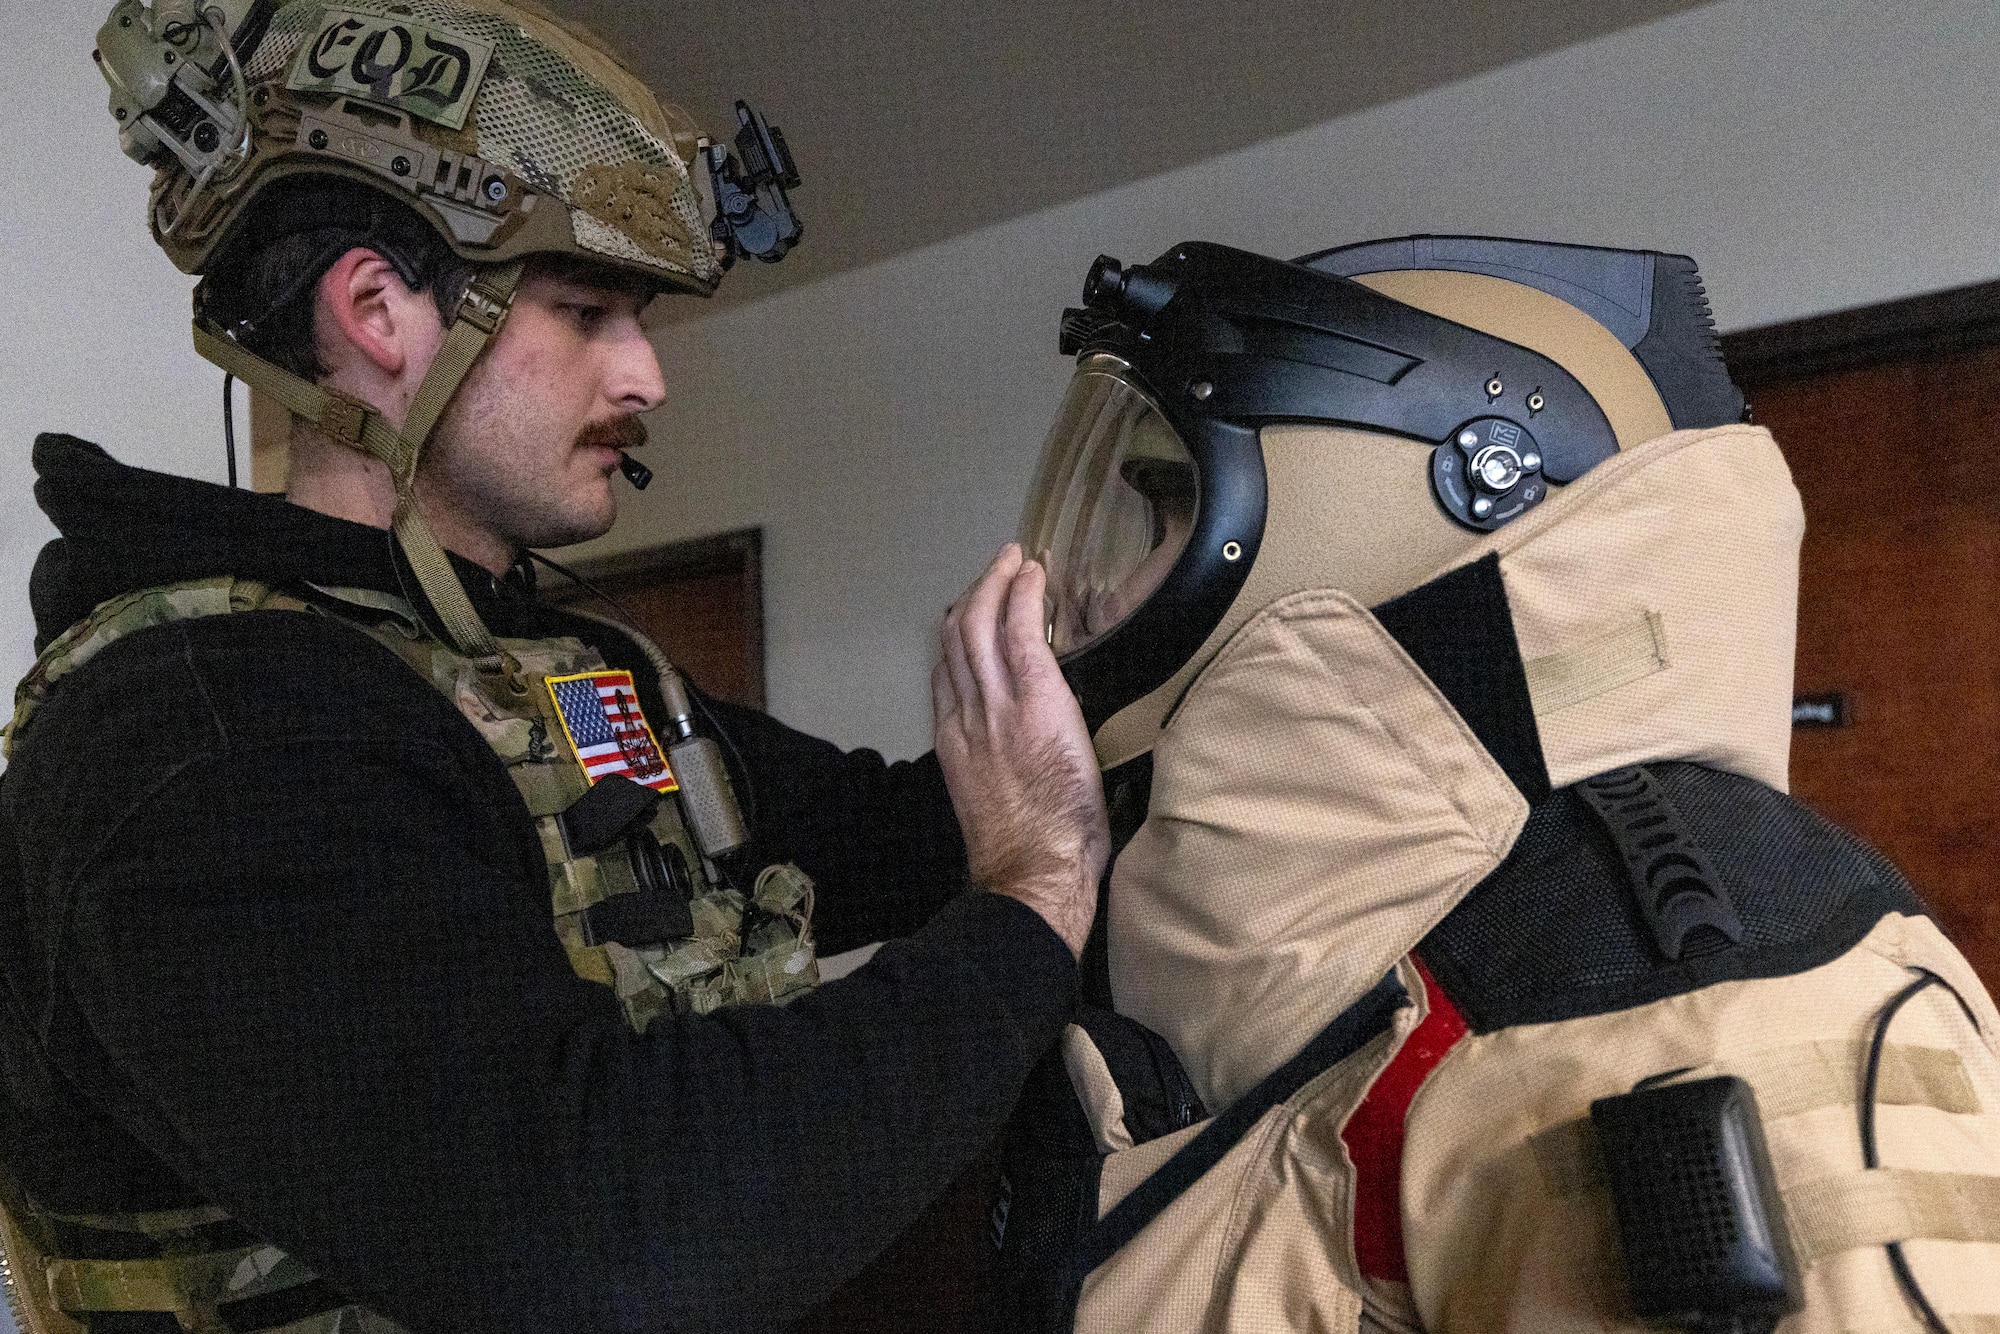 U.S. Air Force Airman 1st Class Robert Wittig, left, closes the helmet on Senior Airman Russell J. Bongiovanni’s EOD-10E bomb suit. The explosive ordnance disposal technicians with the 177th Fighter Wing, New Jersey Air National Guard, were participating in the Joint Chemical, Biological, Radiological, Nuclear, and High Yield Explosives Characterization, Exploitation, and Mitigation Course at the CURE Insurance Arena in Trenton, New Jersey, March 27, 2024.